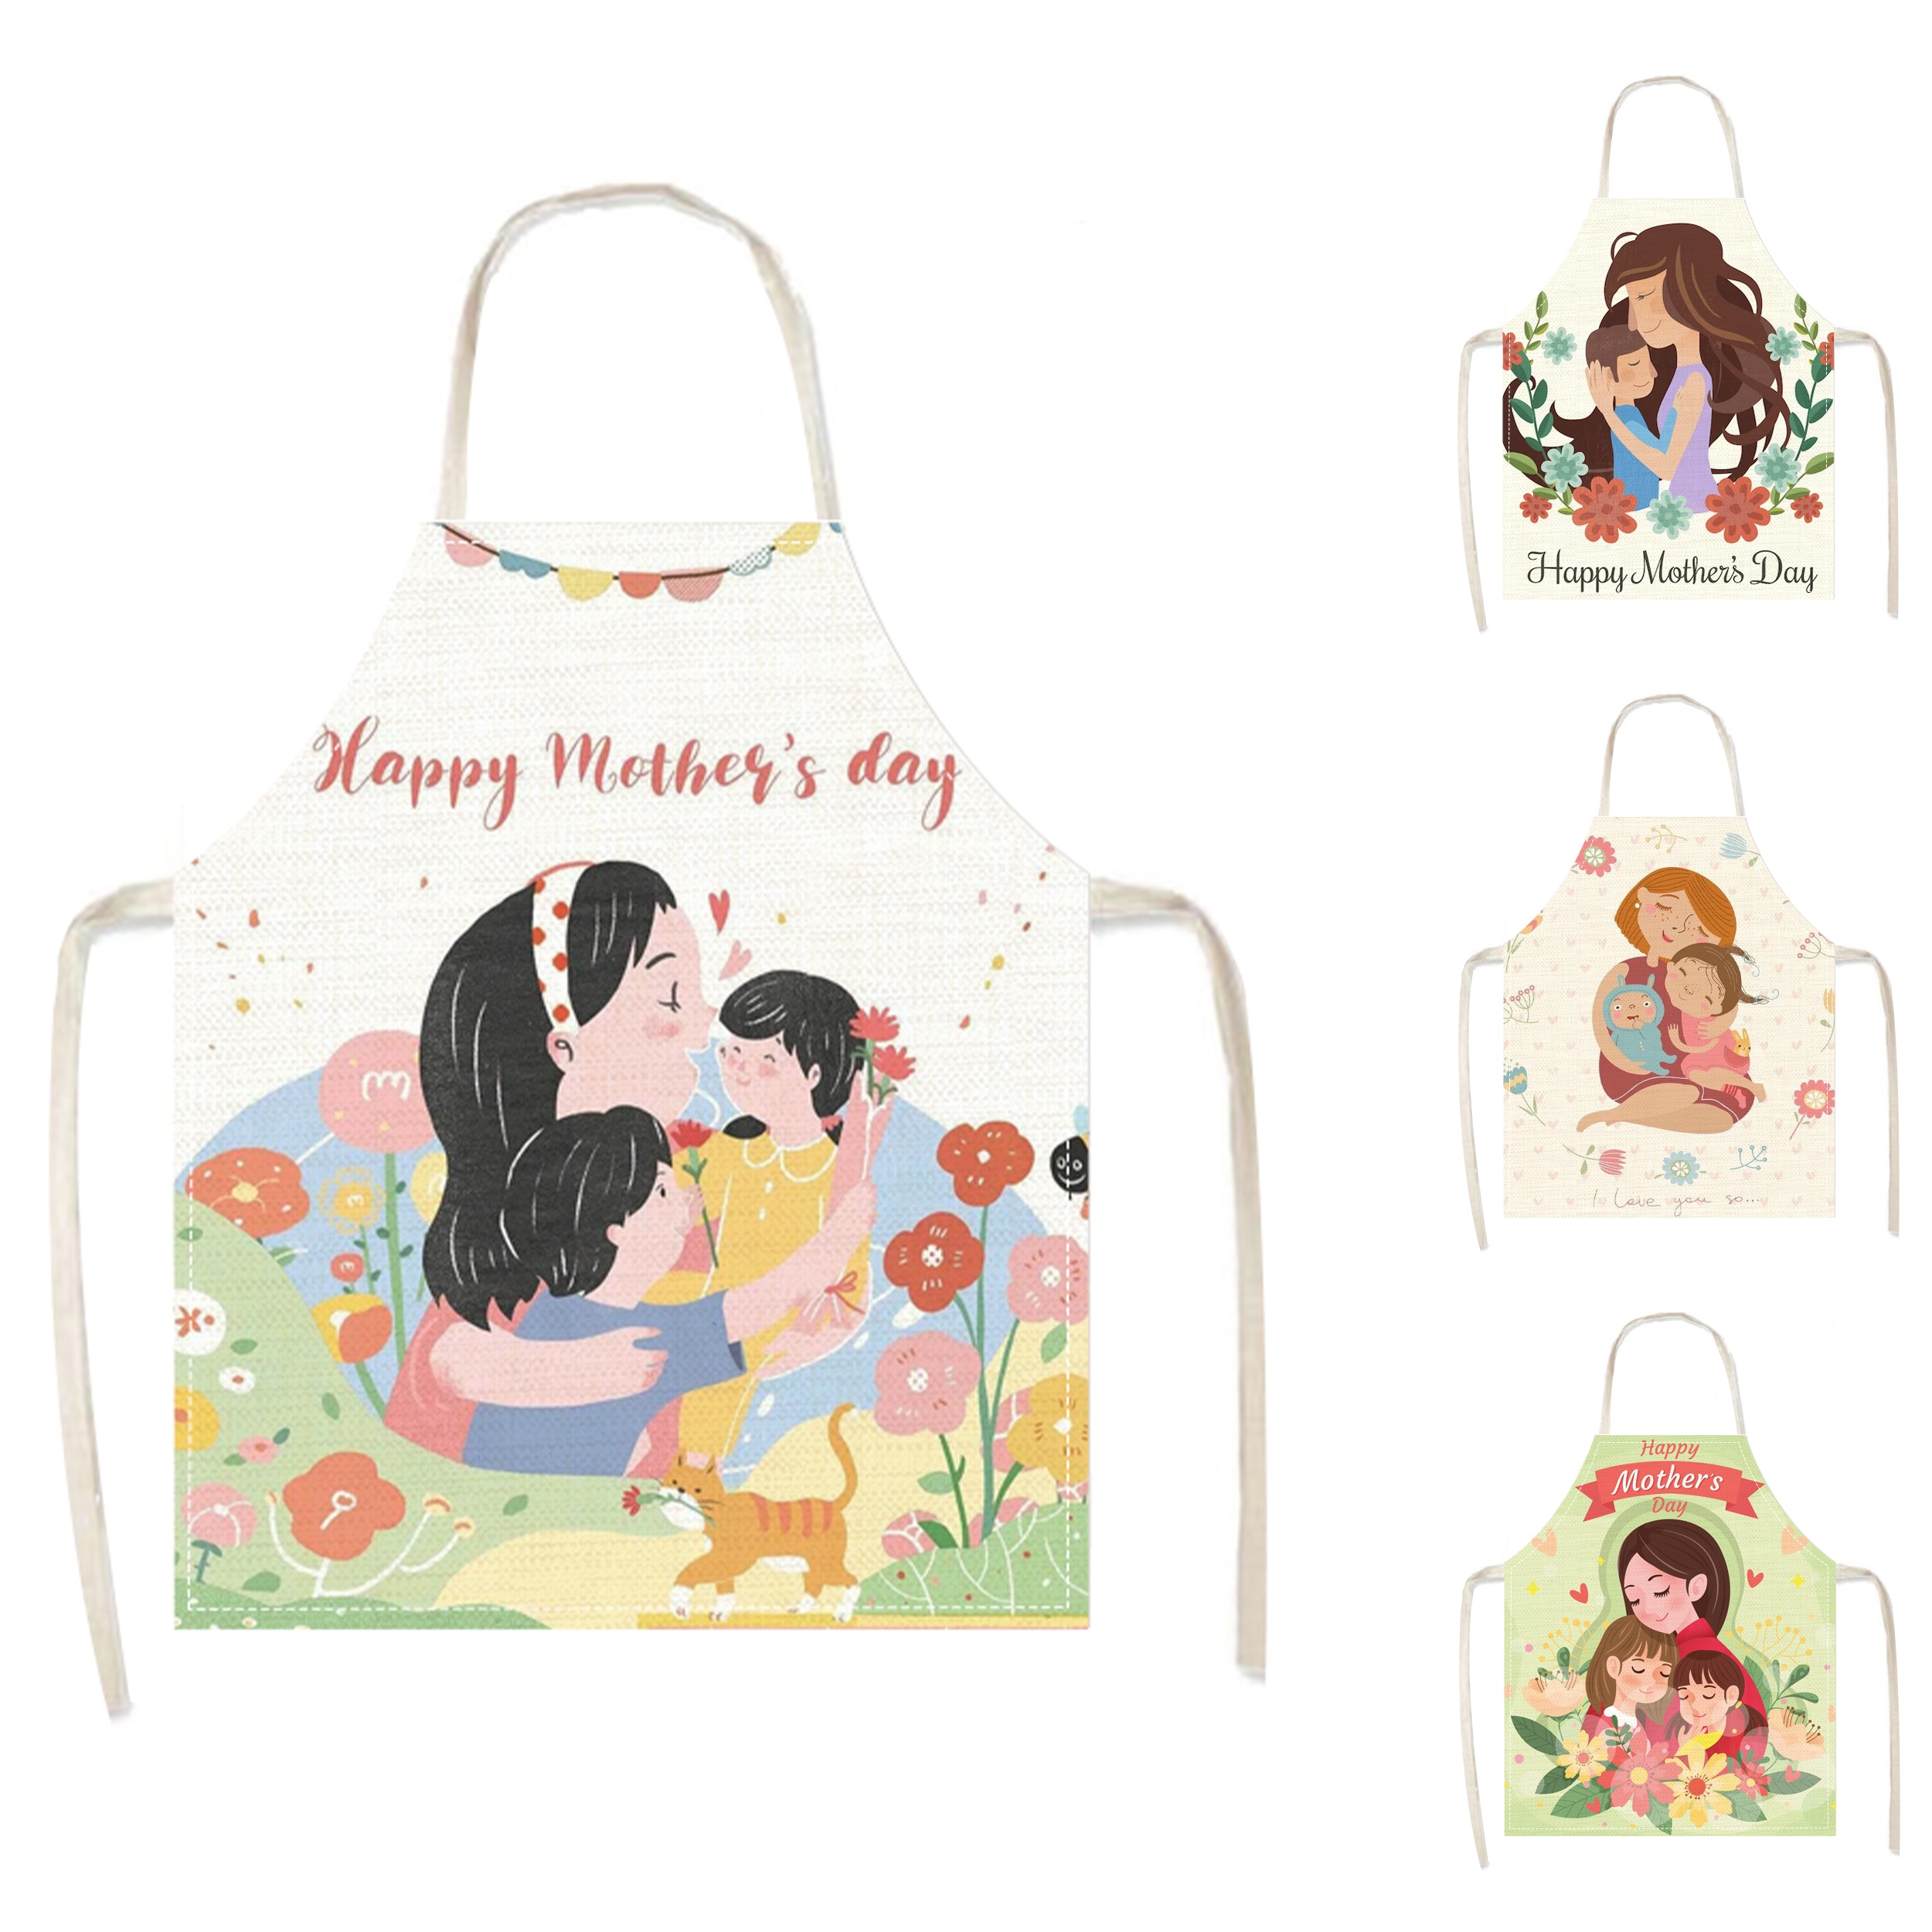 Apron With Print „Mom's Kitchen“ – Essential Cooking Tool For